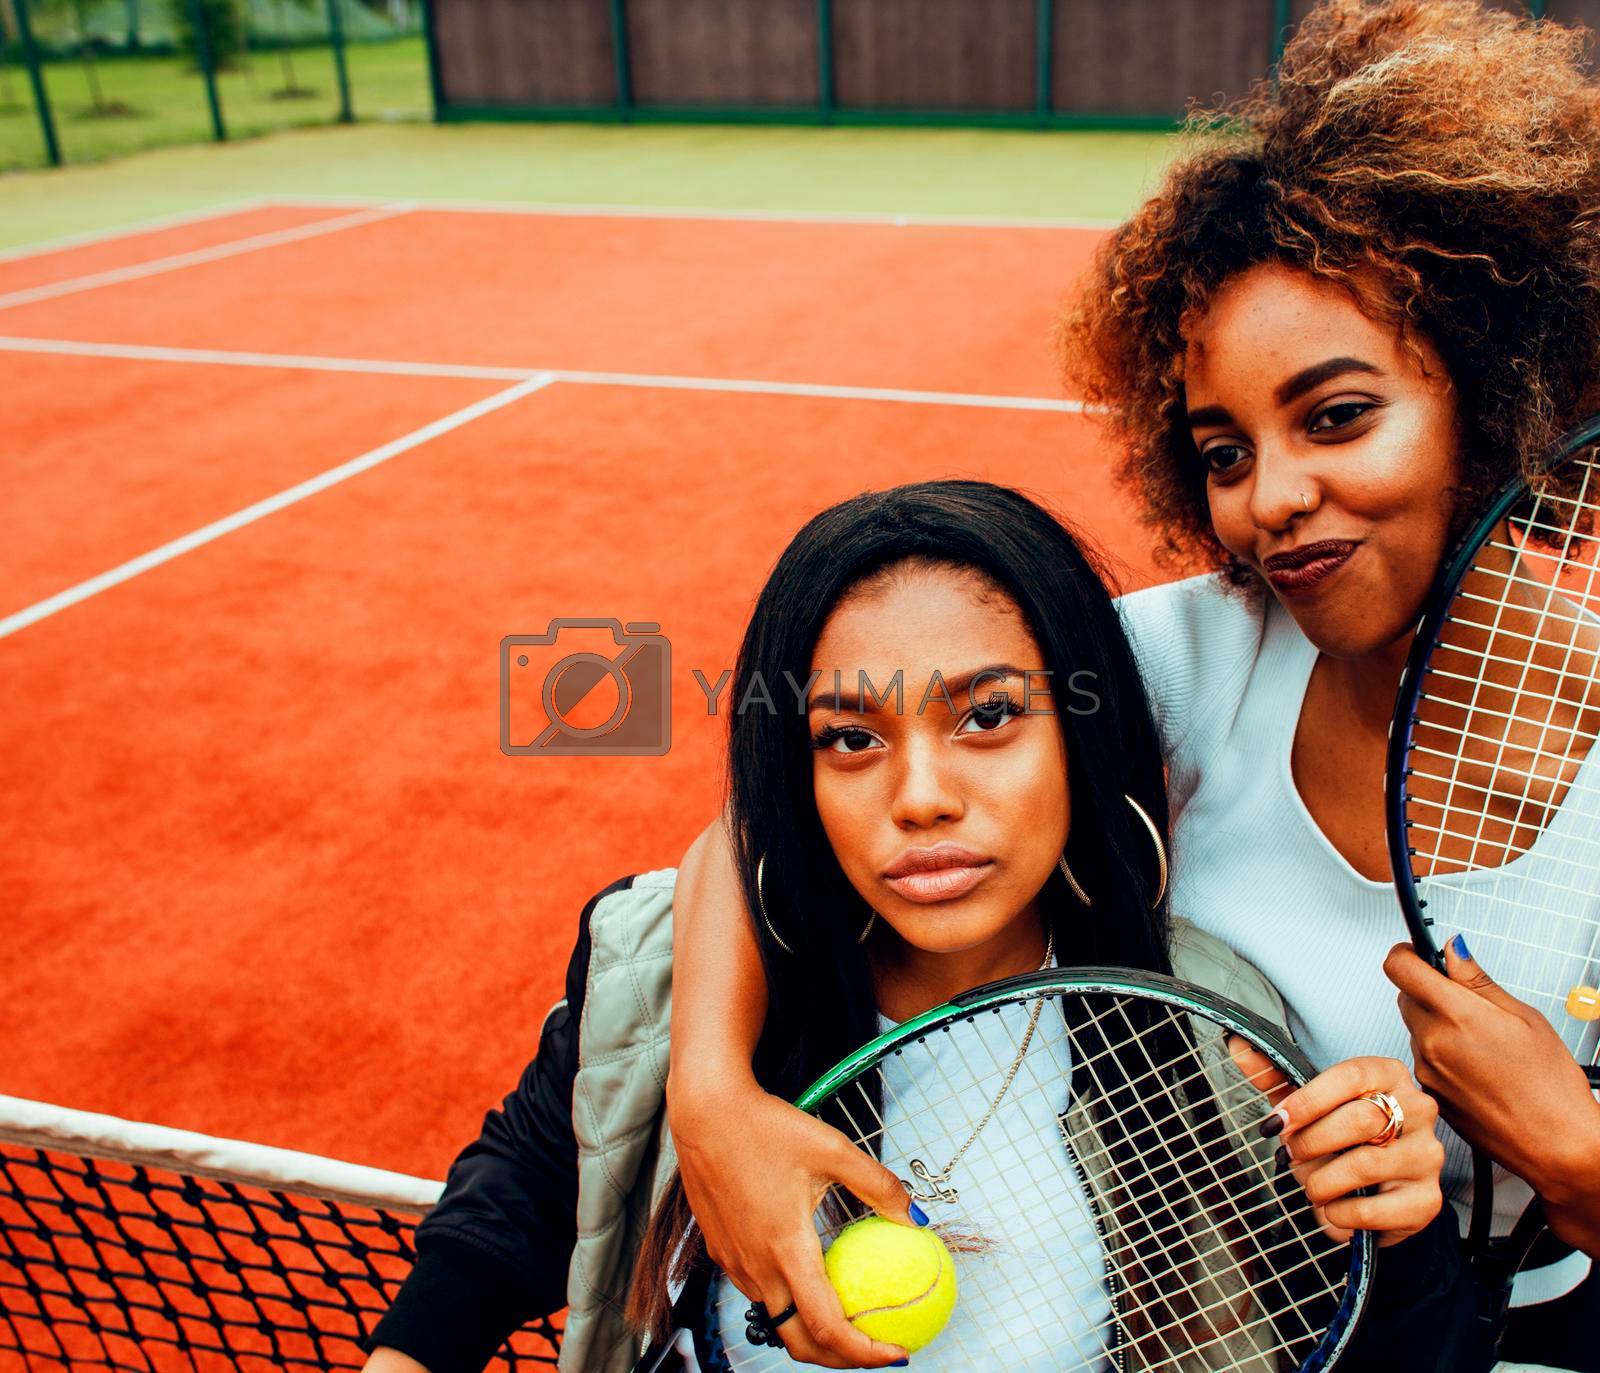 young pretty girlfriends hanging on tennis court, fashion stylish dressed swag, best friends happy smiling together lifestyle close up